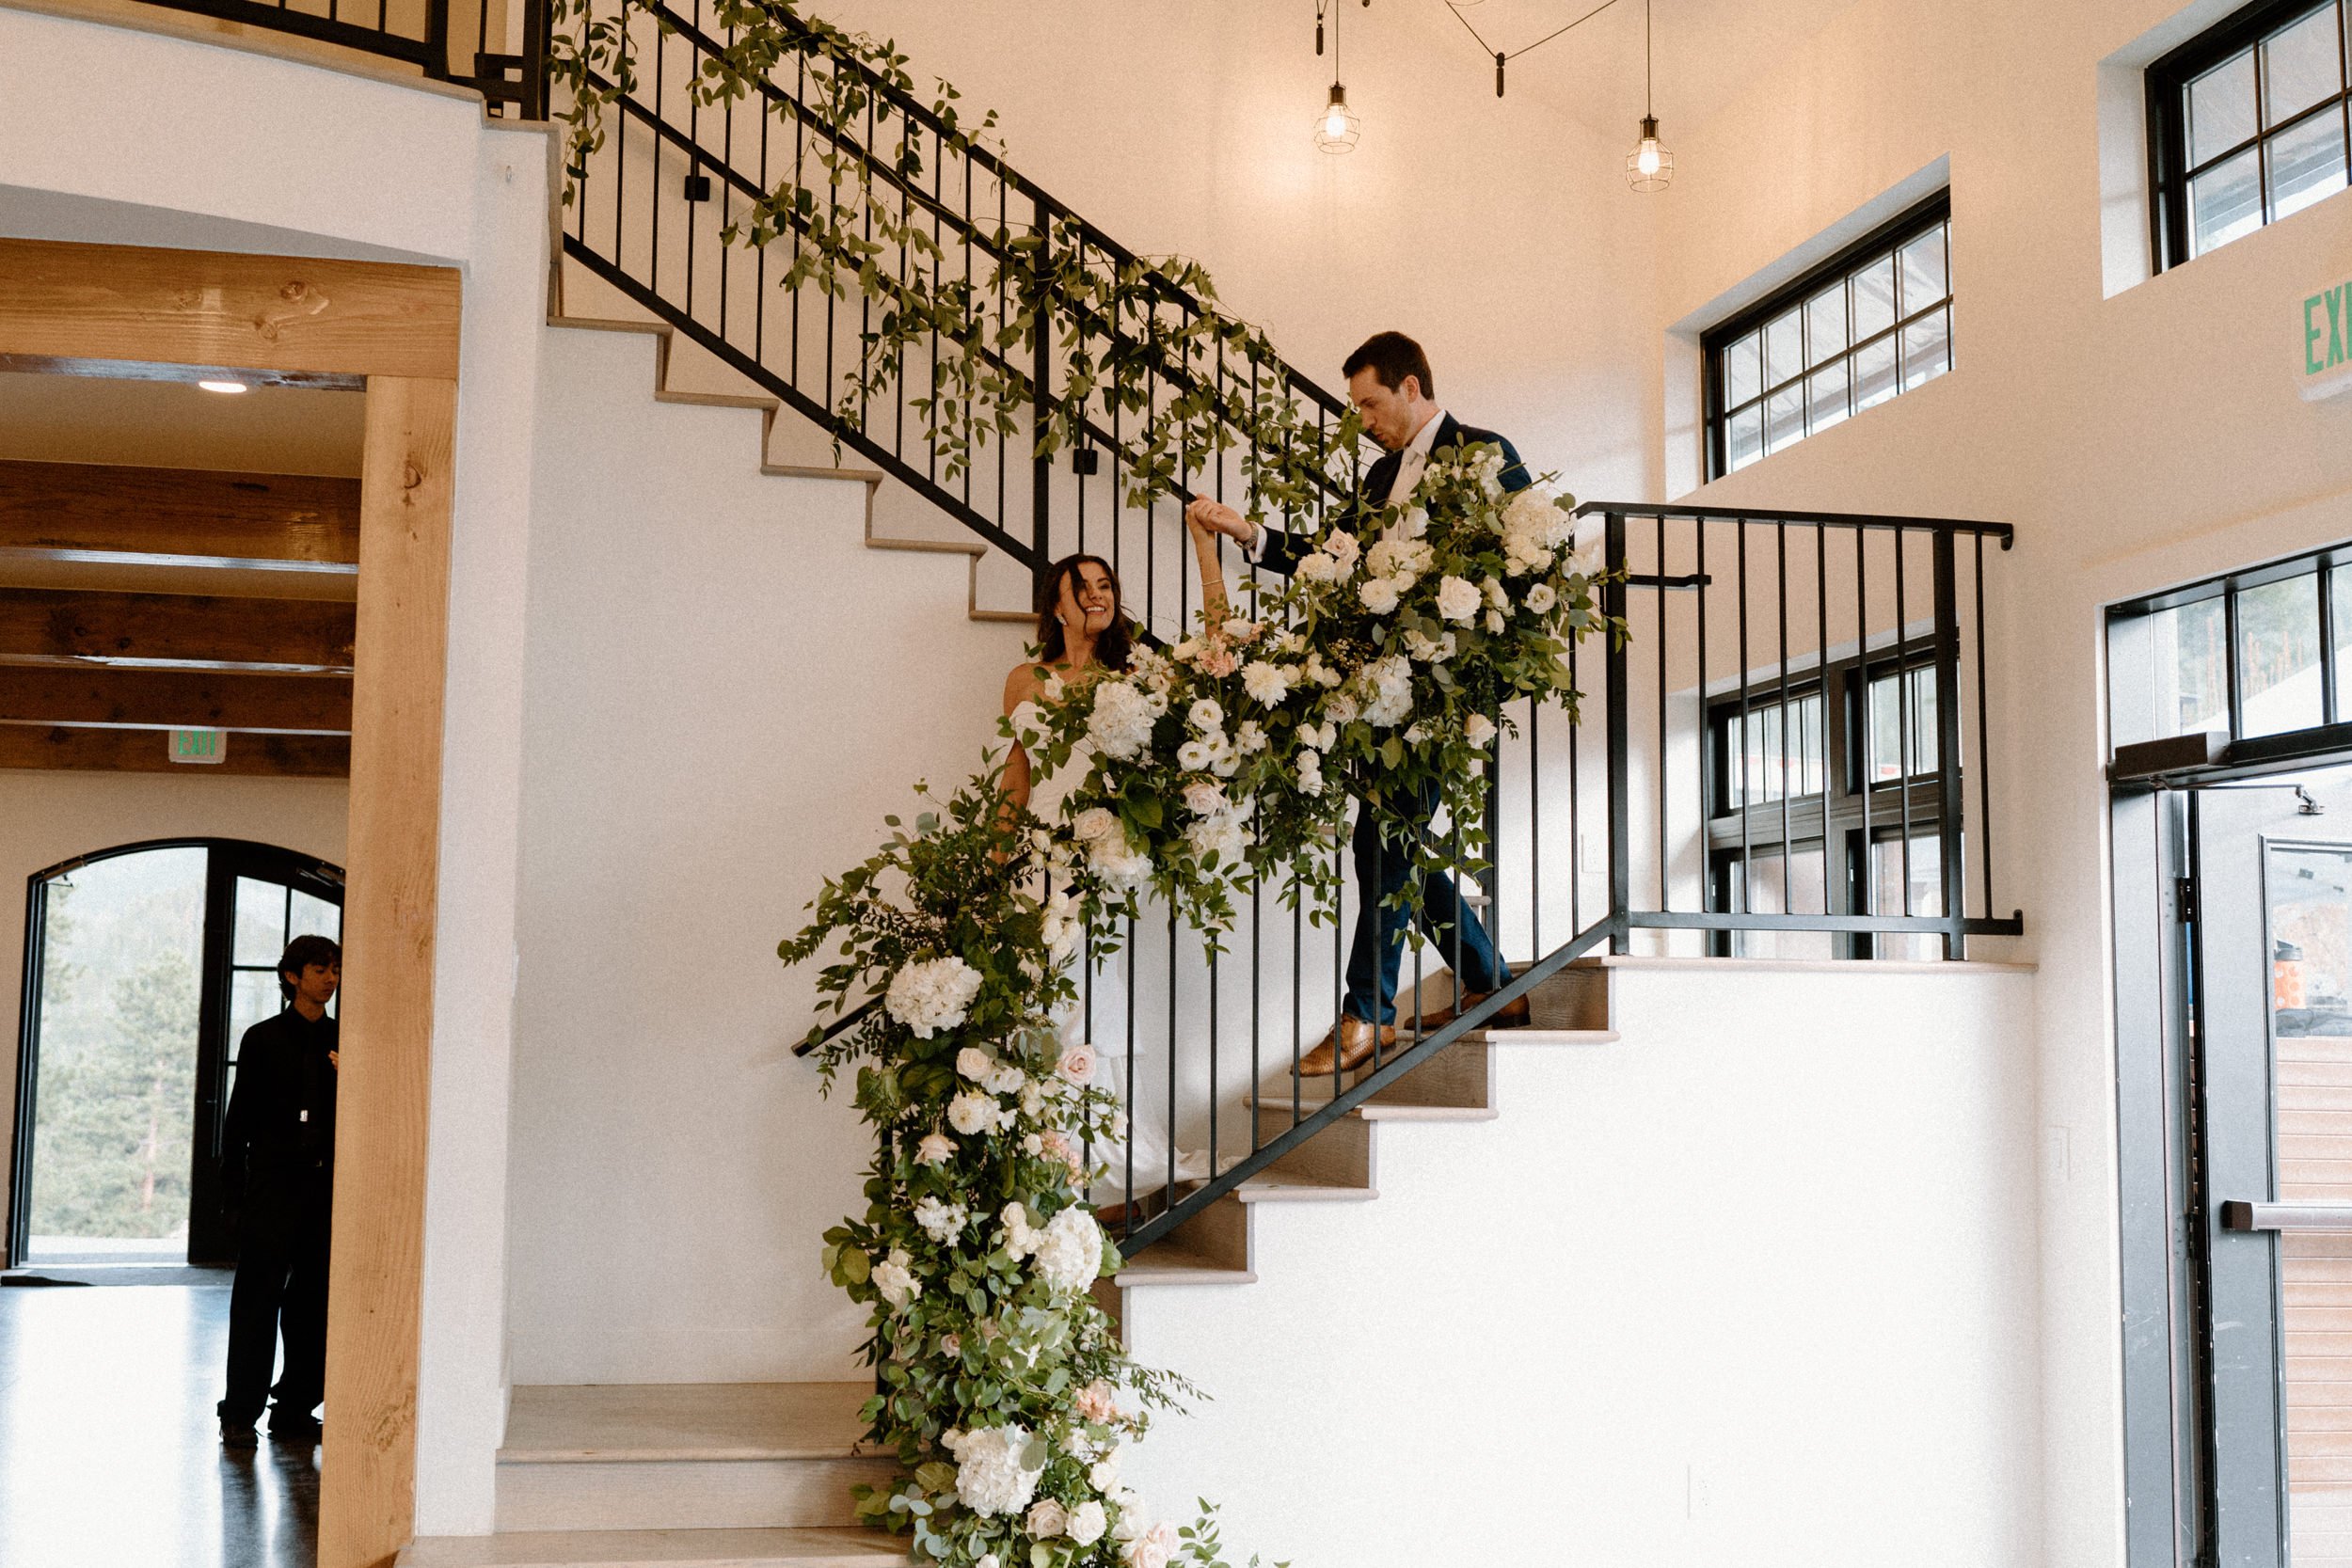 The bride and groom walk down the stairs decorated with greenery and white roses